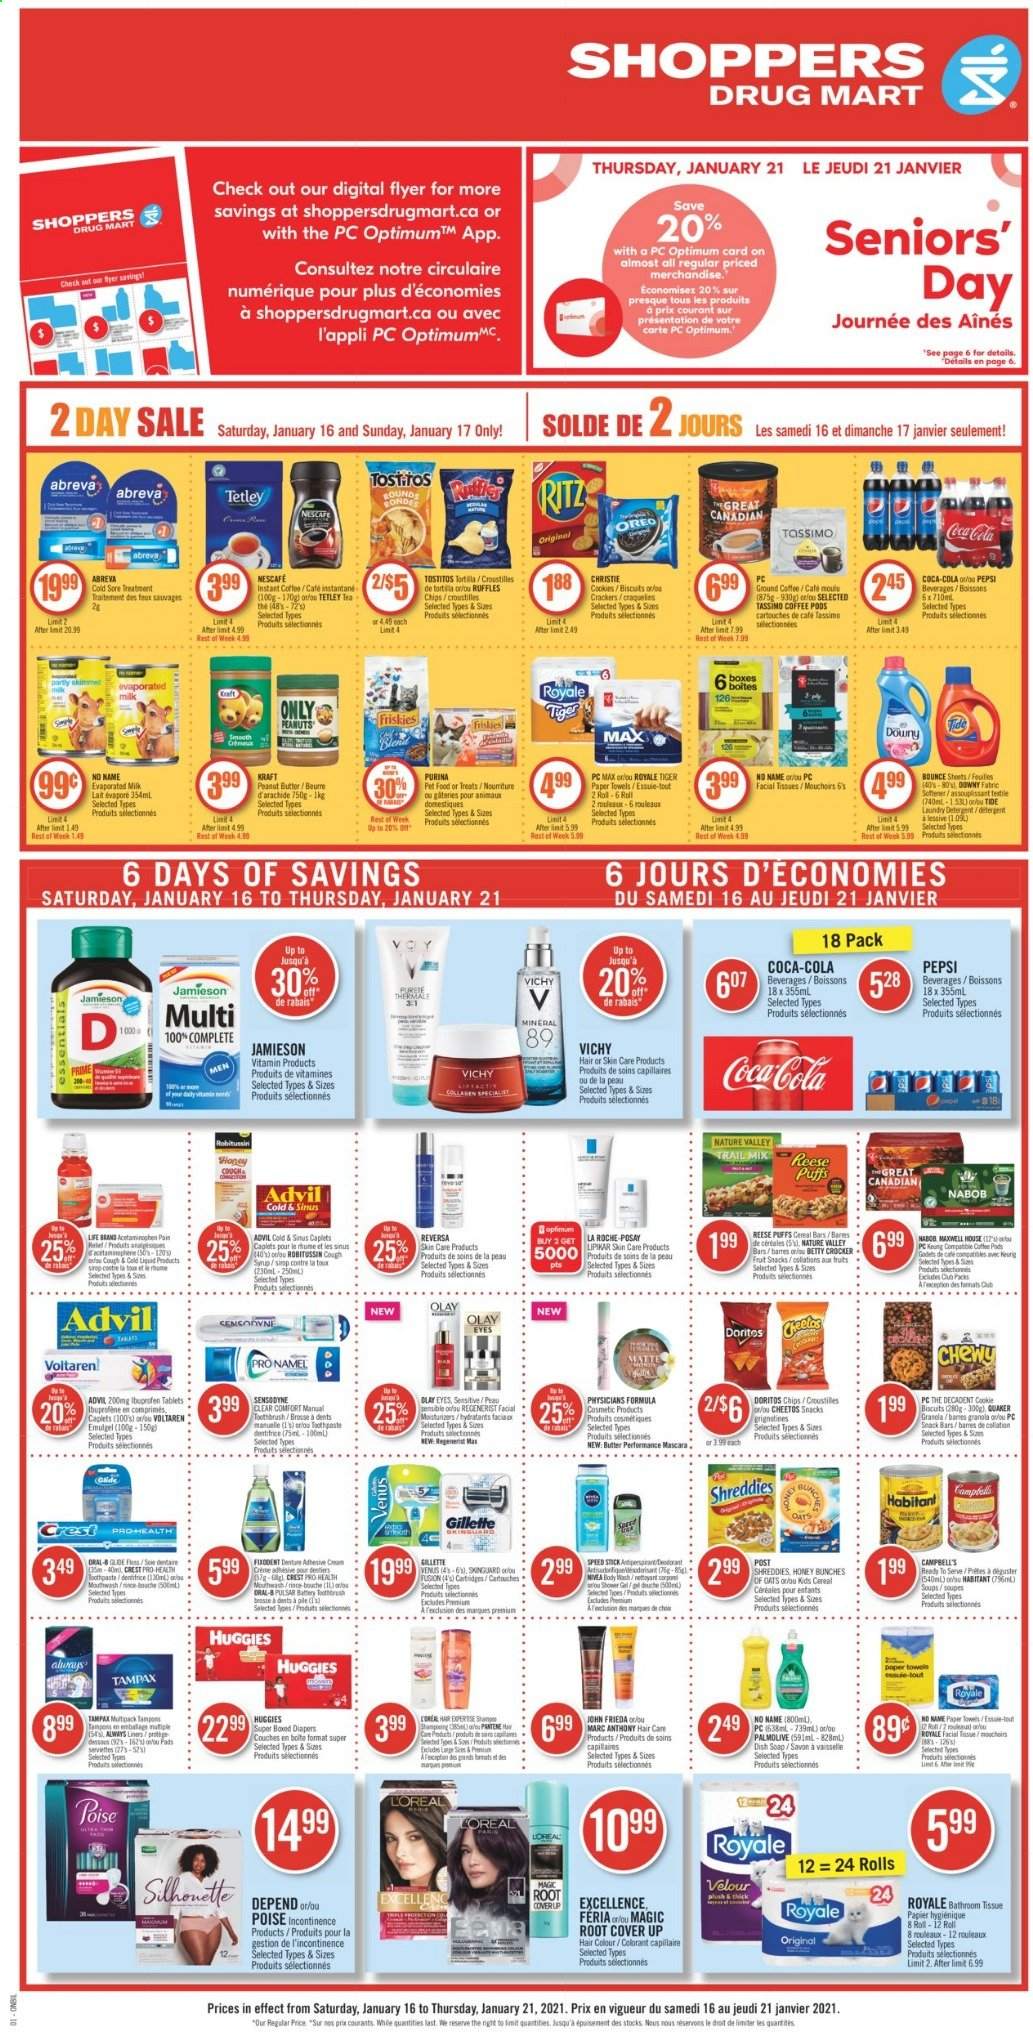 thumbnail - Shoppers Drug Mart Flyer - January 16, 2021 - January 21, 2021 - Sales products - snack, cereal bar, crackers, biscuit, RITZ, Doritos, Cheetos, Tostitos, cereals, puffs, Quaker, Nature Valley, Kraft®, peanut butter, syrup, trail mix, Coca-Cola, Pepsi, Maxwell House, coffee pods, instant coffee, ground coffee, nappies, bath tissue, Always liners, kitchen towels, paper towels, Tide, Bounce, body wash, shower gel, Vichy, Palmolive, soap, toothbrush, toothpaste, mouthwash, Fixodent, Crest, tampons, Abreva, facial tissues, L’Oréal, La Roche-Posay, Olay, hair color, John Frieda, Speed Stick, Venus, Ibuprofen, Advil Rapid, Oreo, Gillette, granola, mascara, Robitussin, Tampax, Huggies, Pantene, Nivea, chips, Sensodyne, Nescafé. Page 1.